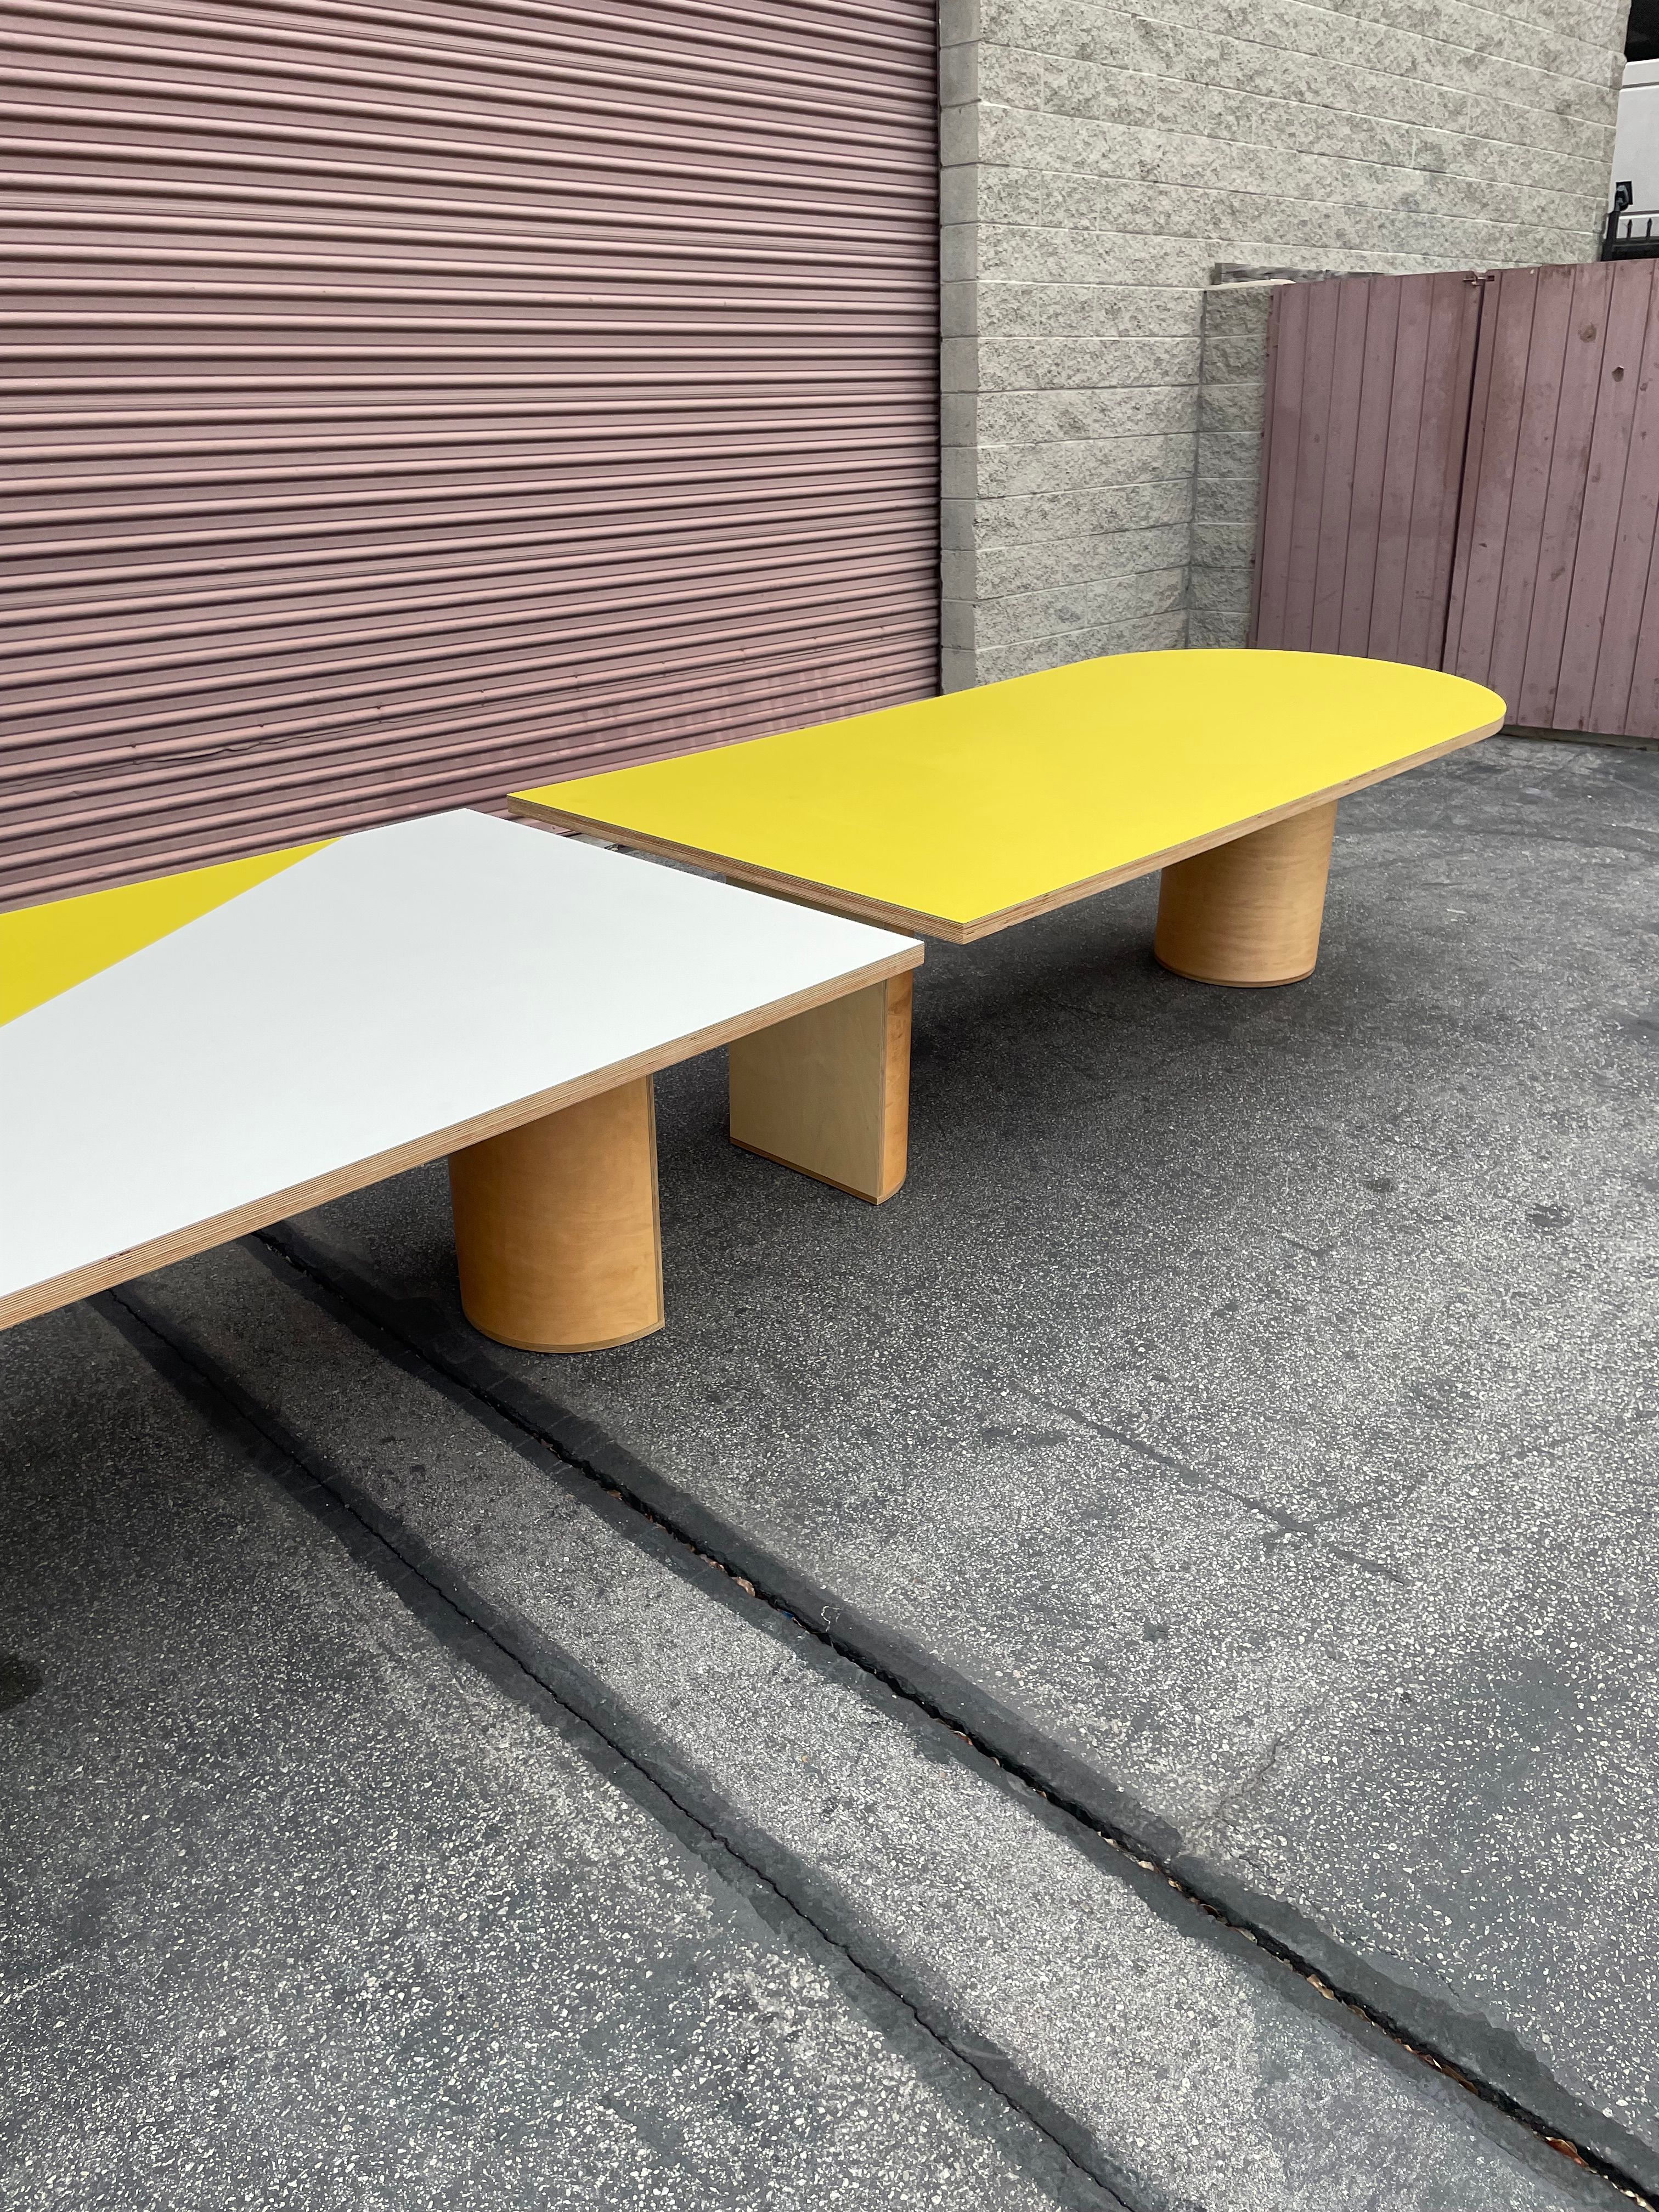  Two Tone Community Tables product image 4